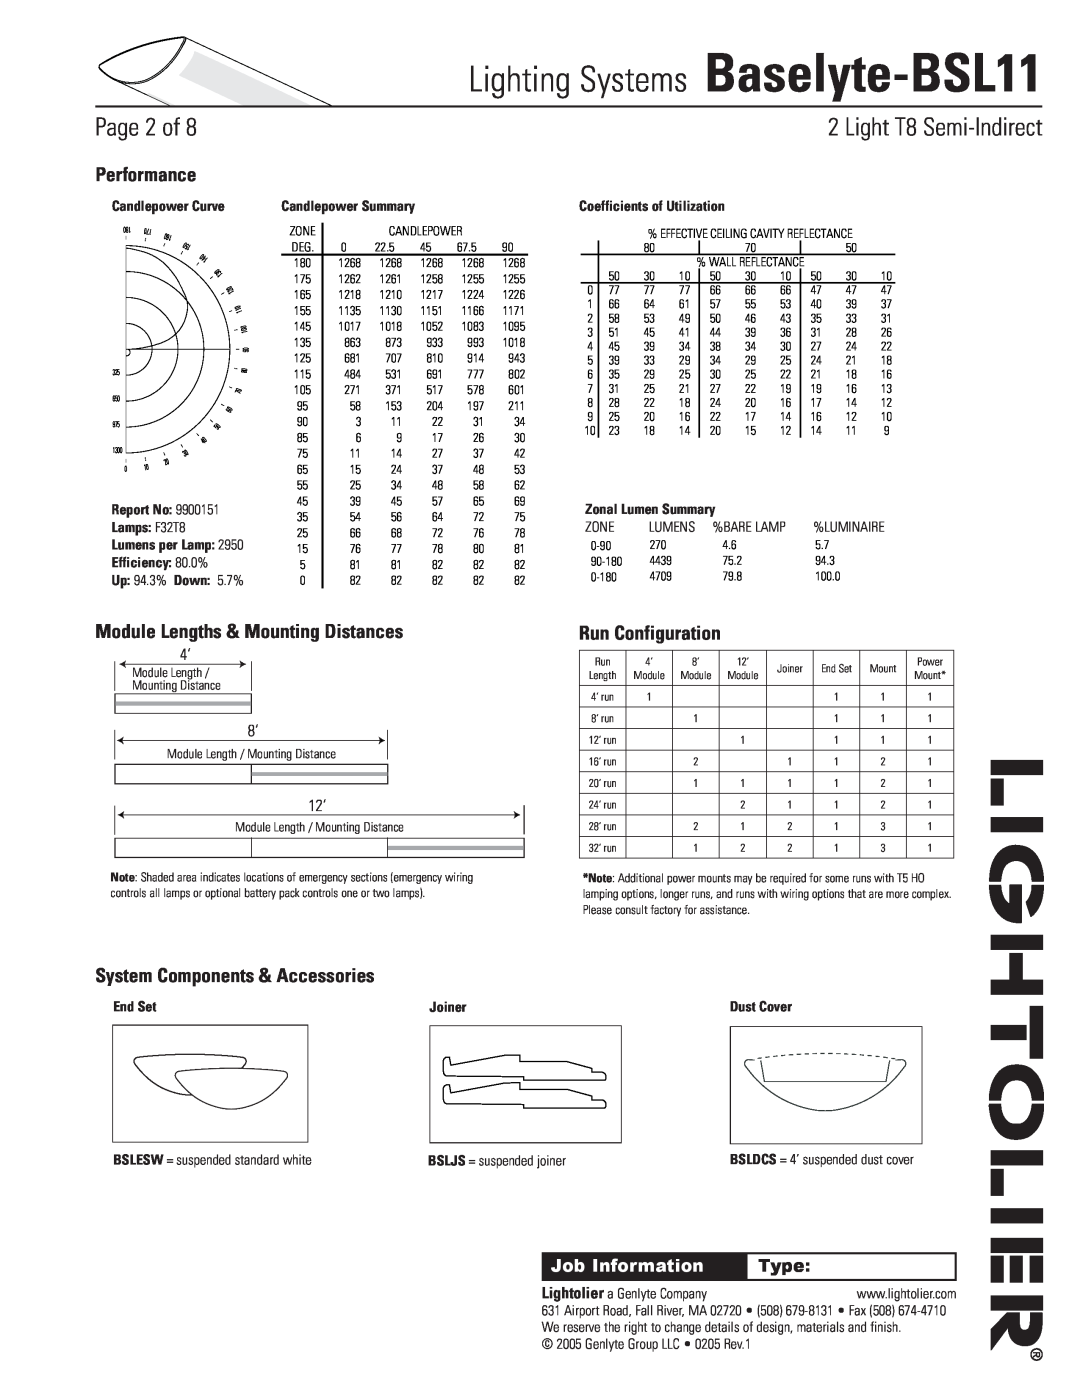 Lightolier Lighting Systems Baselyte-BSL11, Performance, Module Lengths & Mounting Distances, Run Configuration, Type 